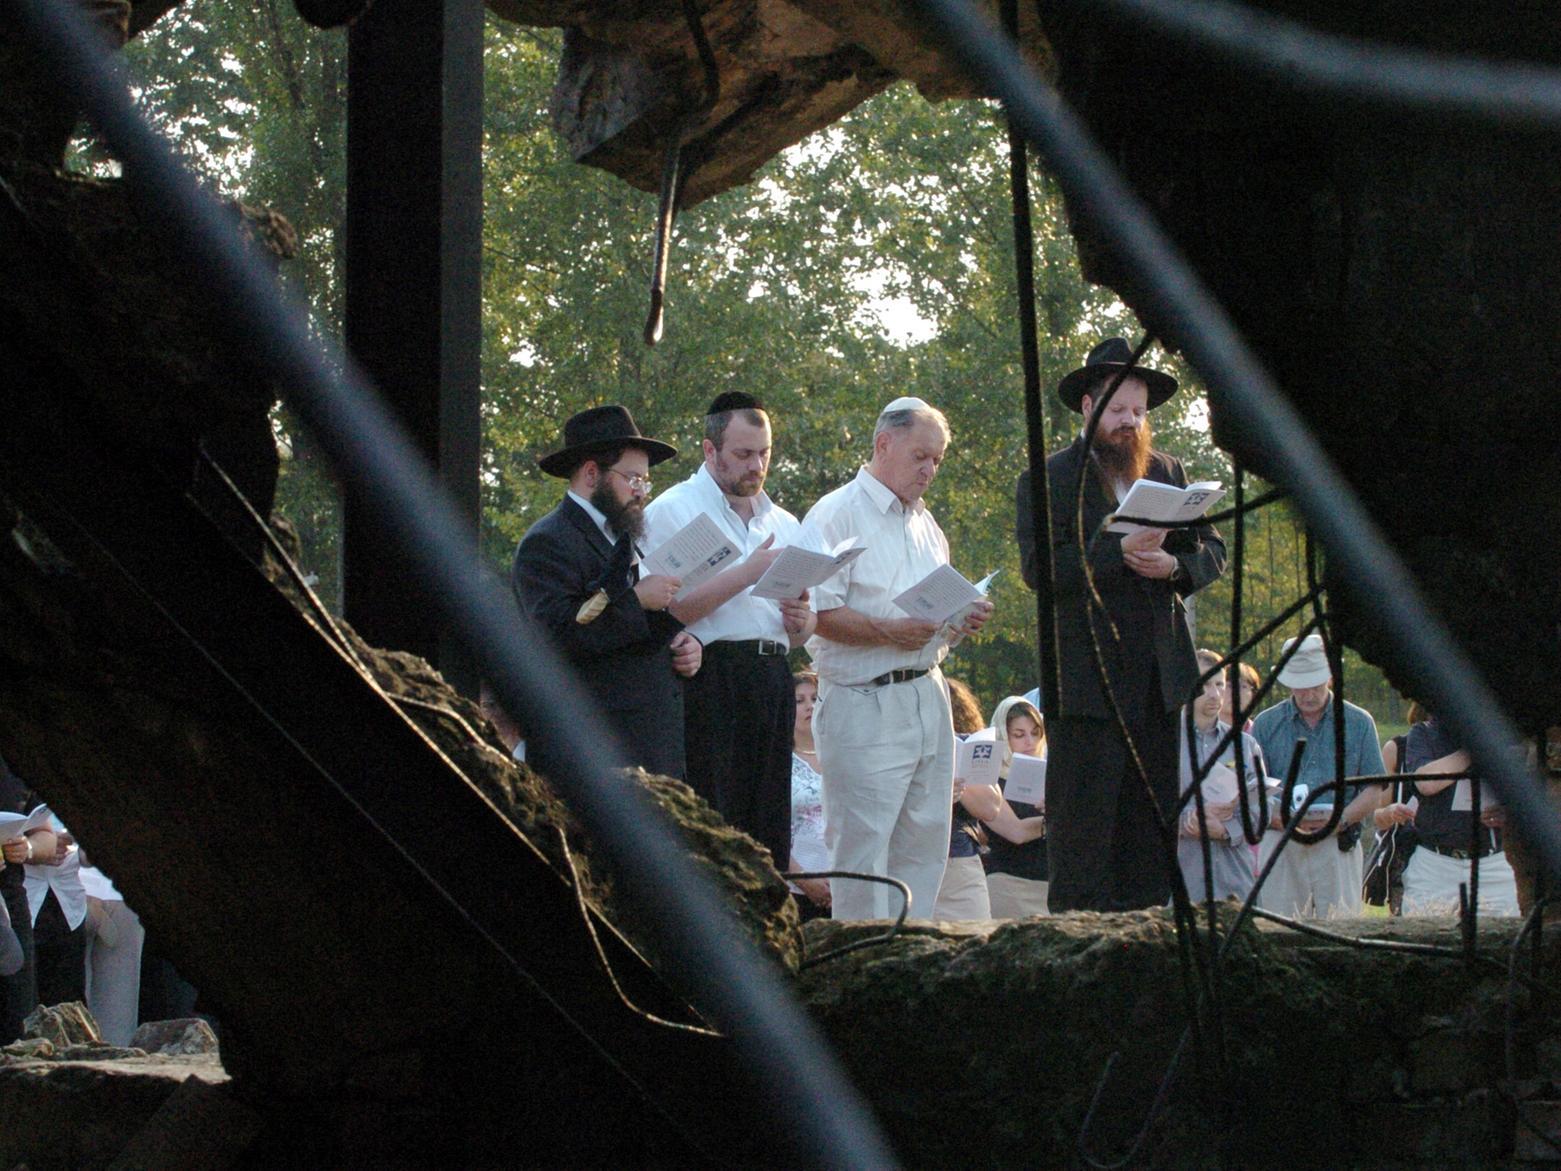 The delegation hold a service by the destroyed crematoria. Pictured, at the front, are Rabbie Mendel Sufrin, Rabbi Daniel Levy, Arek Hersh and Rabbi Shalom Krafchik.